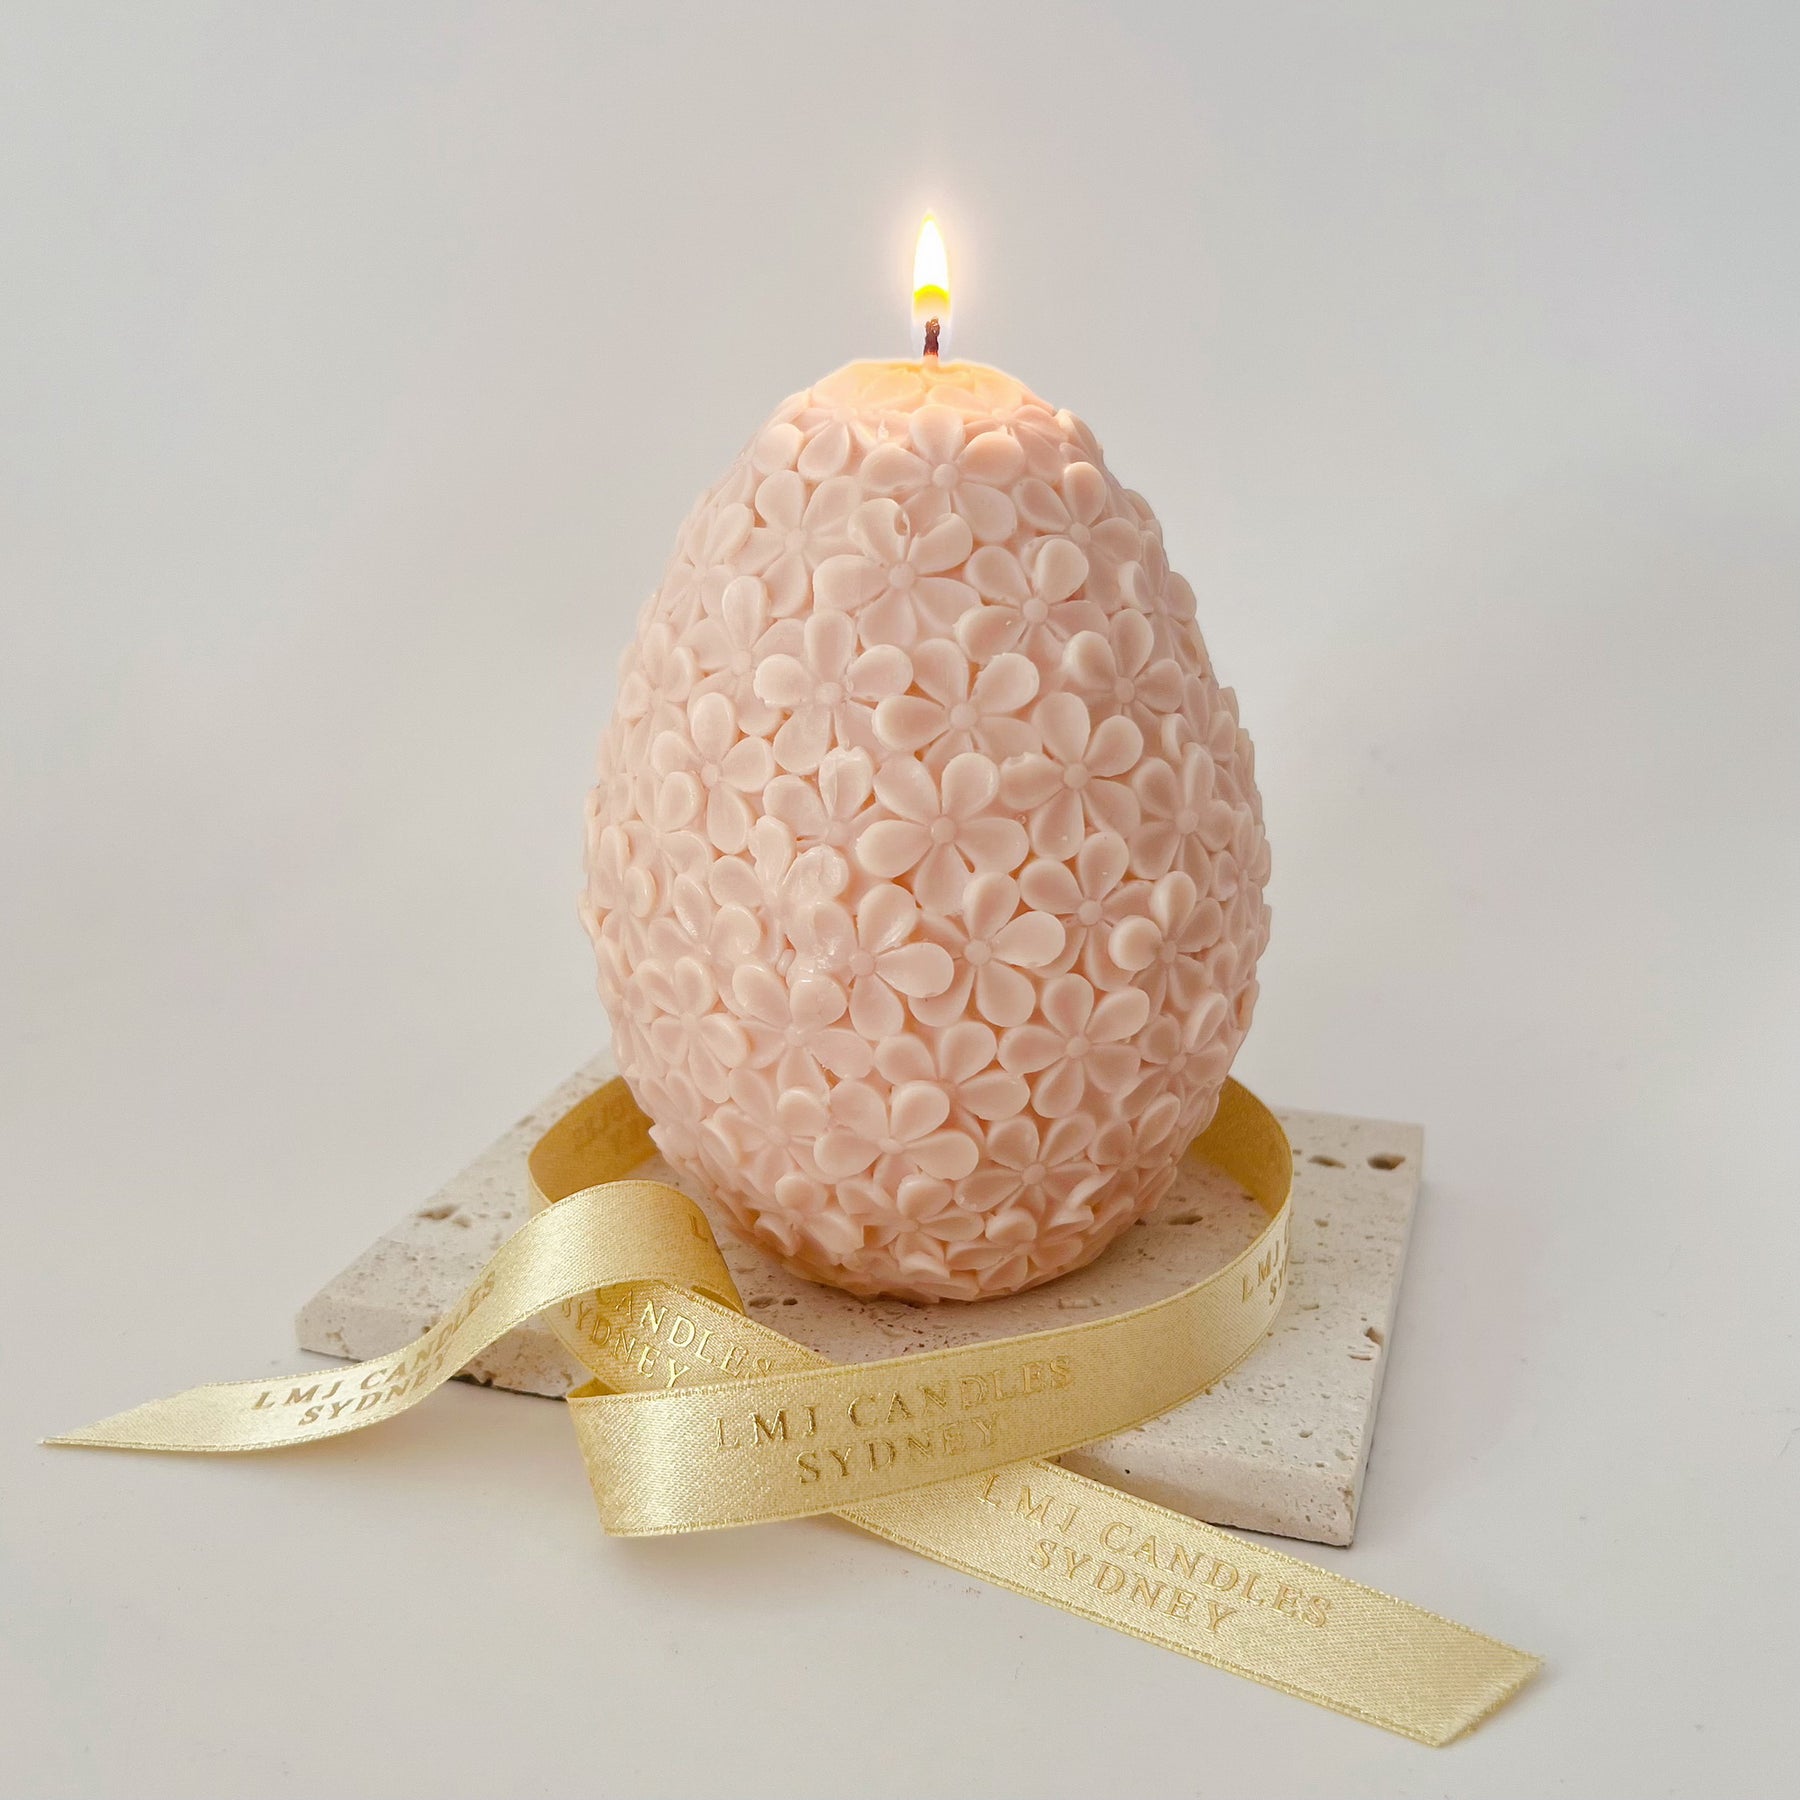 Carved Flower Egg Scented Soy Candle - Easter Gift Décor | LMJ Candles